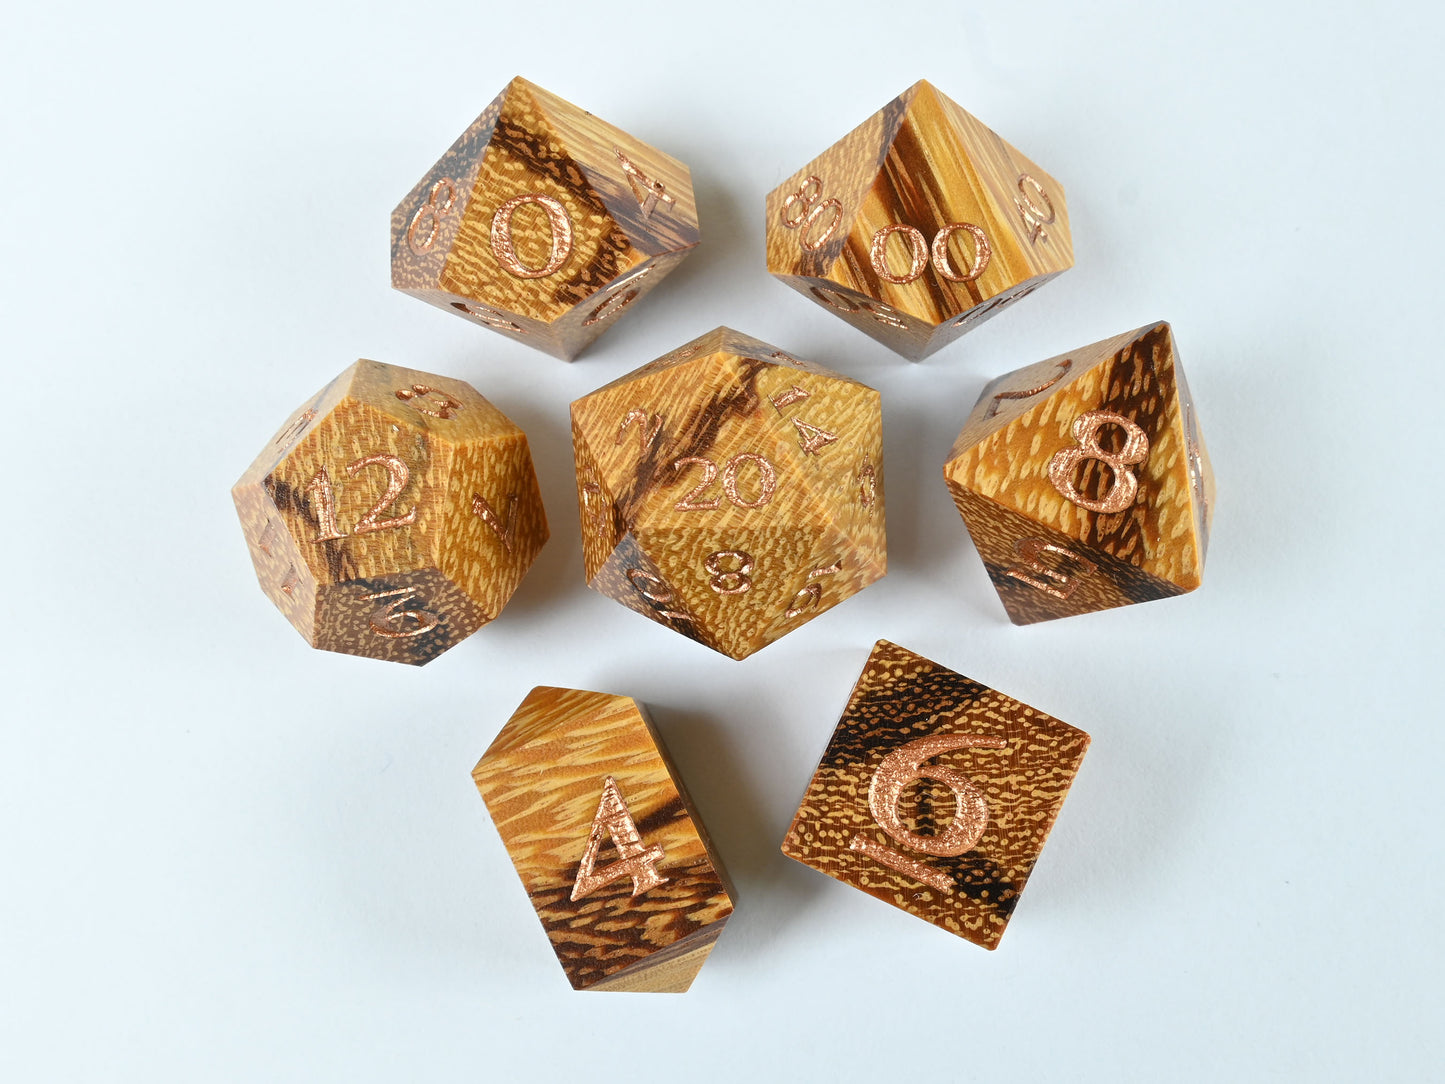 Marblewood dice set with bronze numbers for dnd rpg